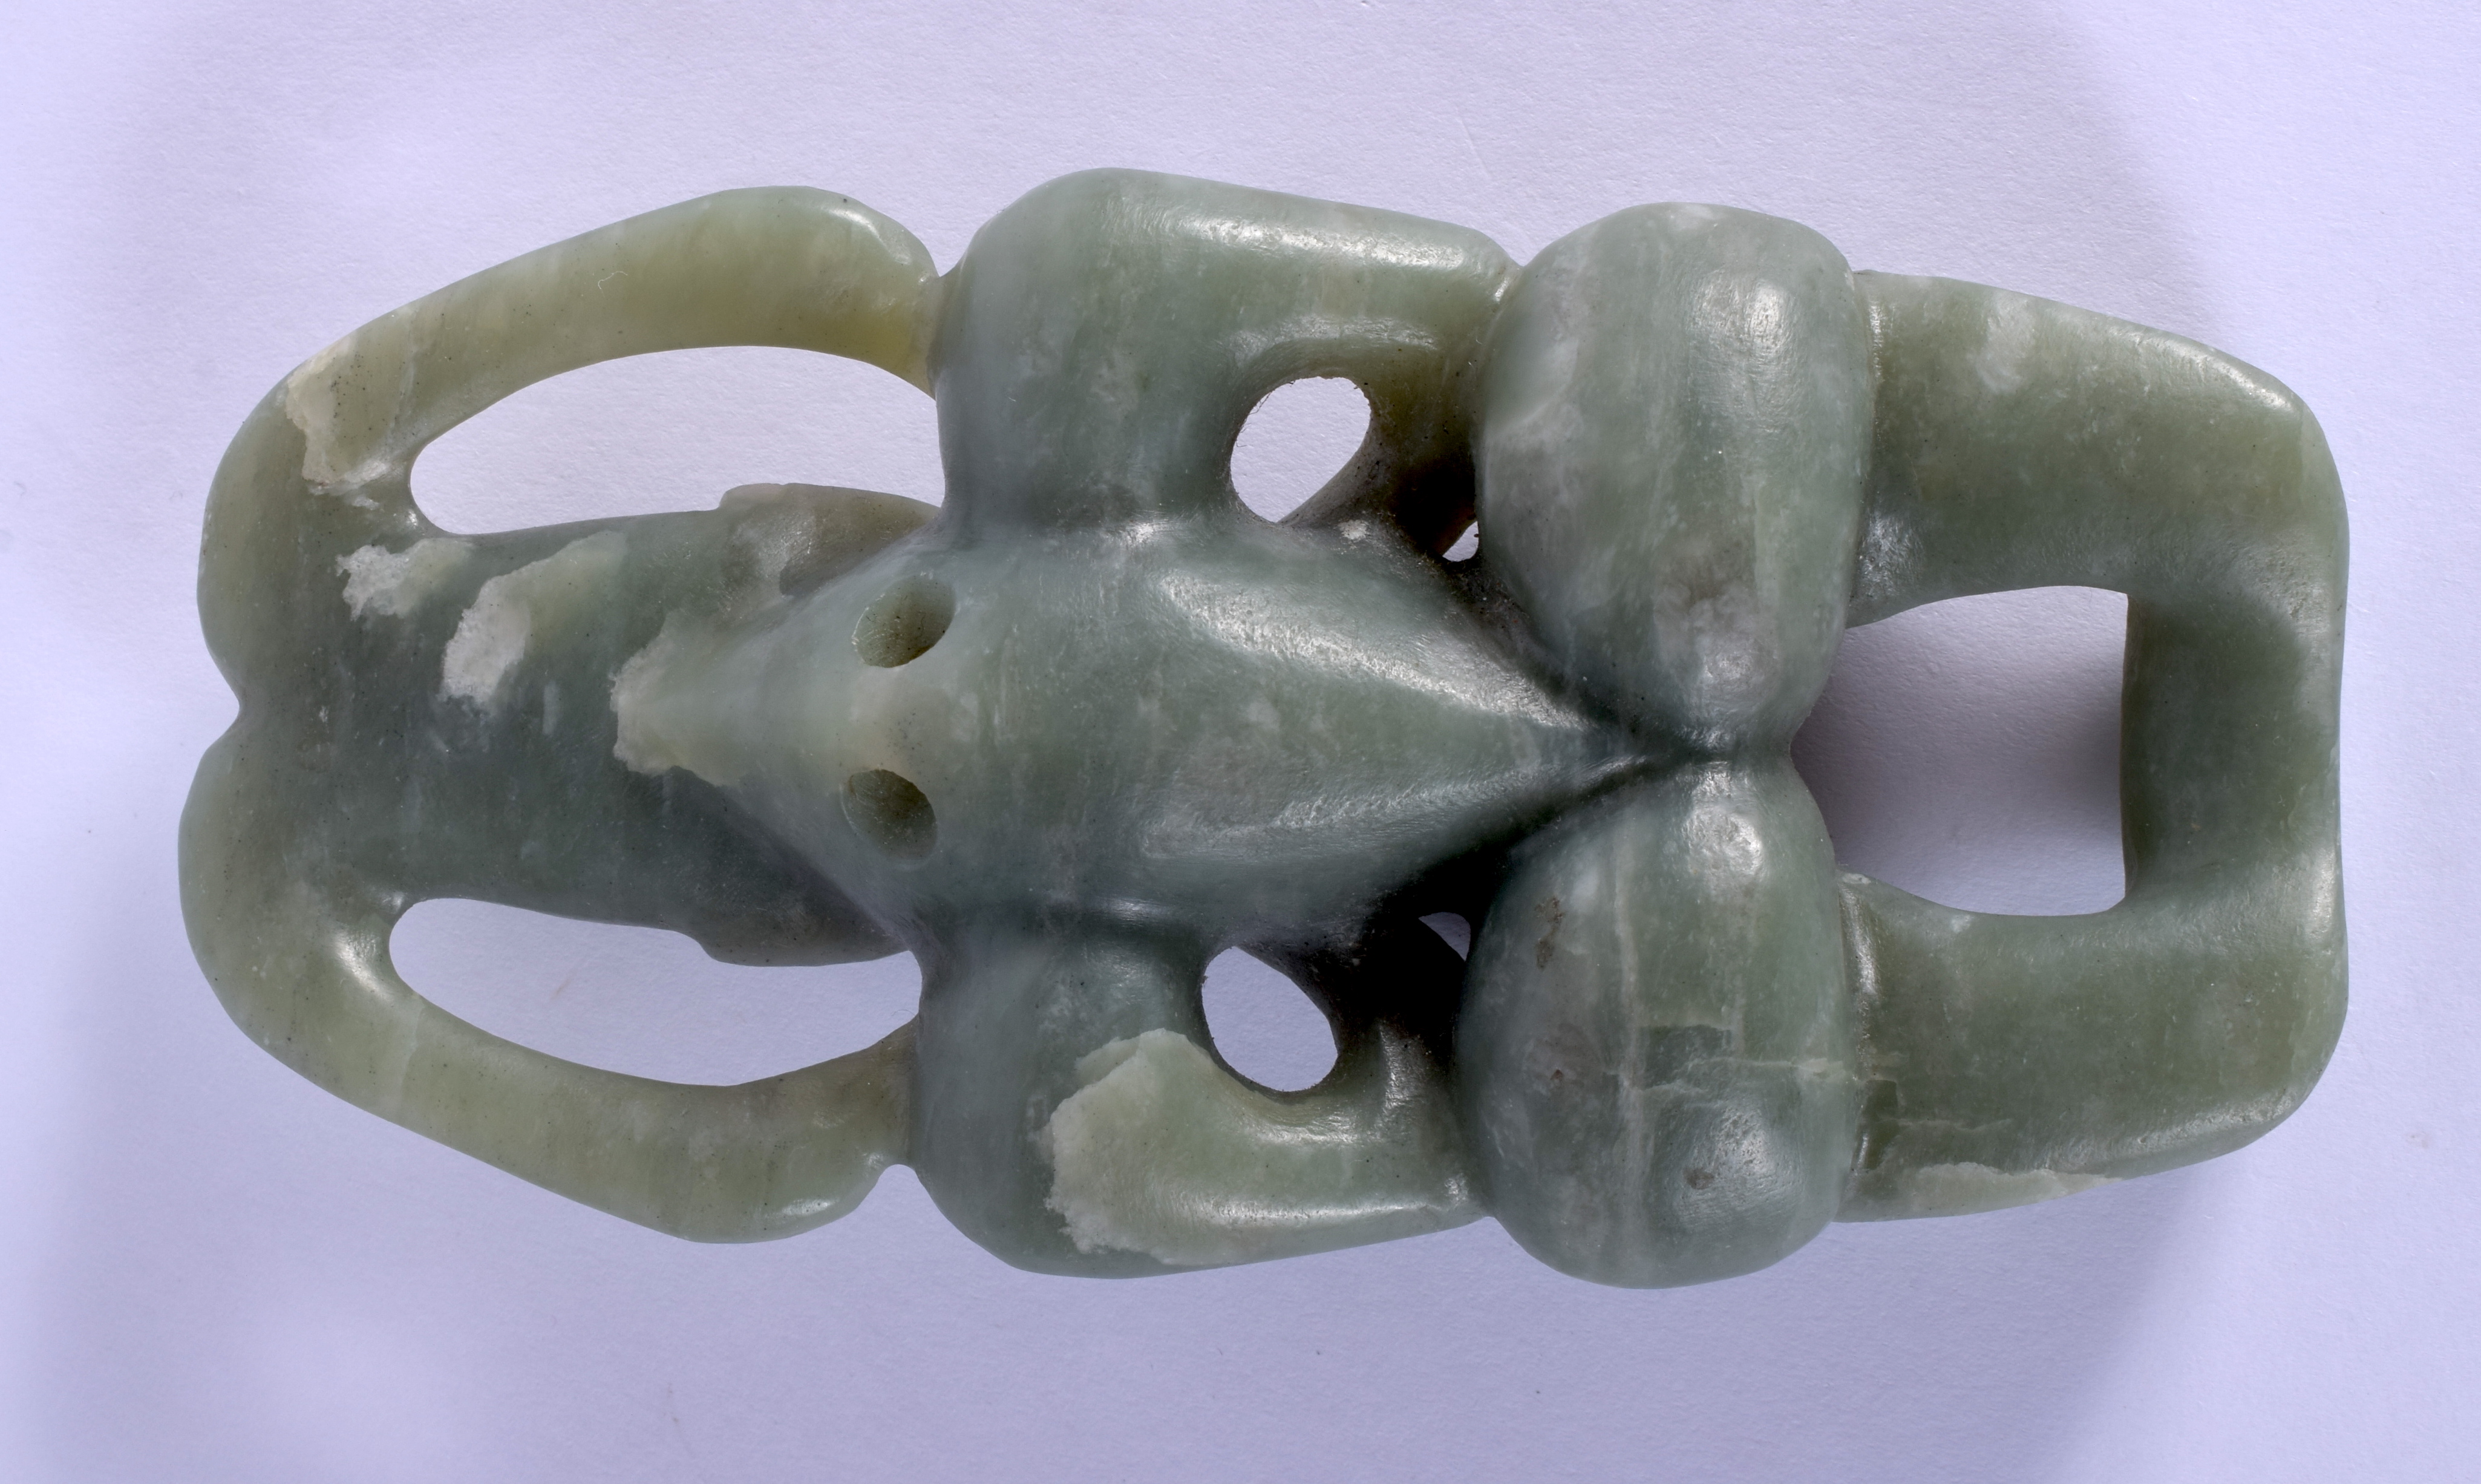 A CHINESE CARVED HONGSHAN CULTURE CARVED JADE FIGURE OF A SUN GOD possibly Neolithic period. 12 cm x - Image 2 of 11